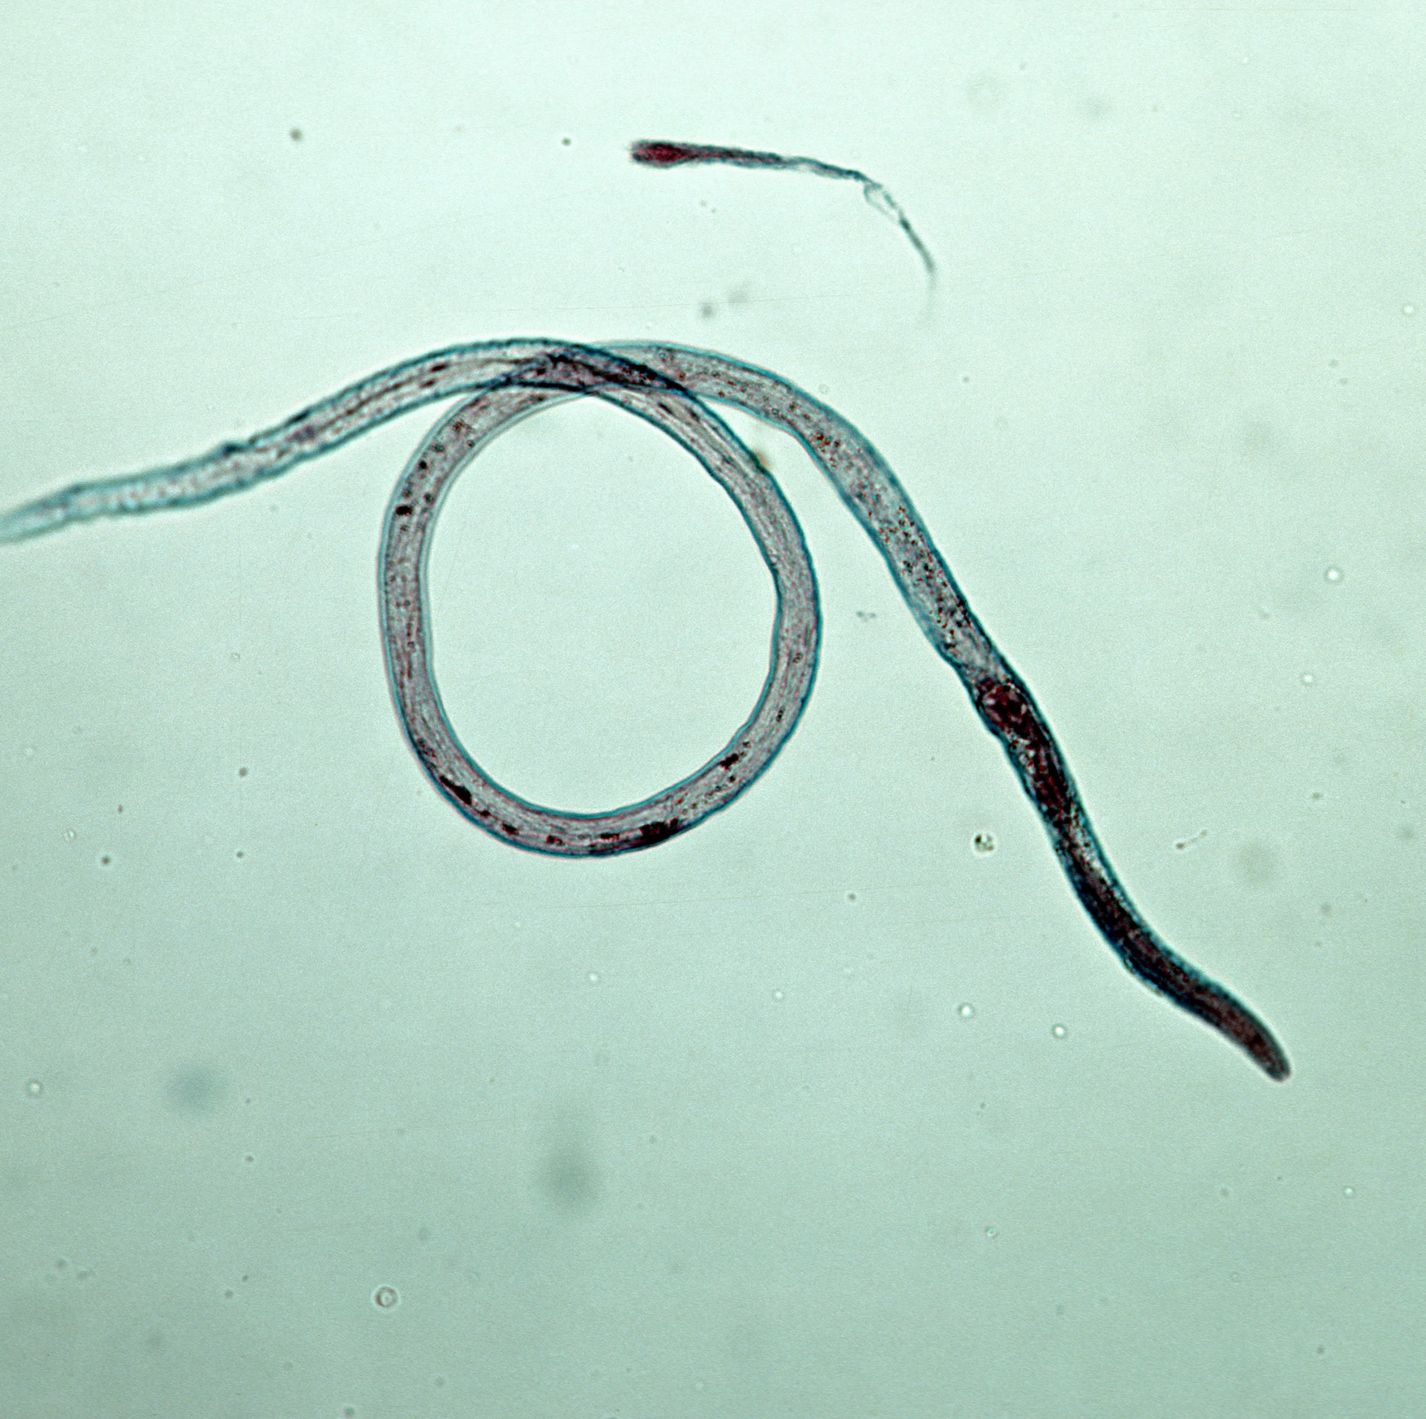 The Worms of Chernobyl Have Apparently Conquered Radiation